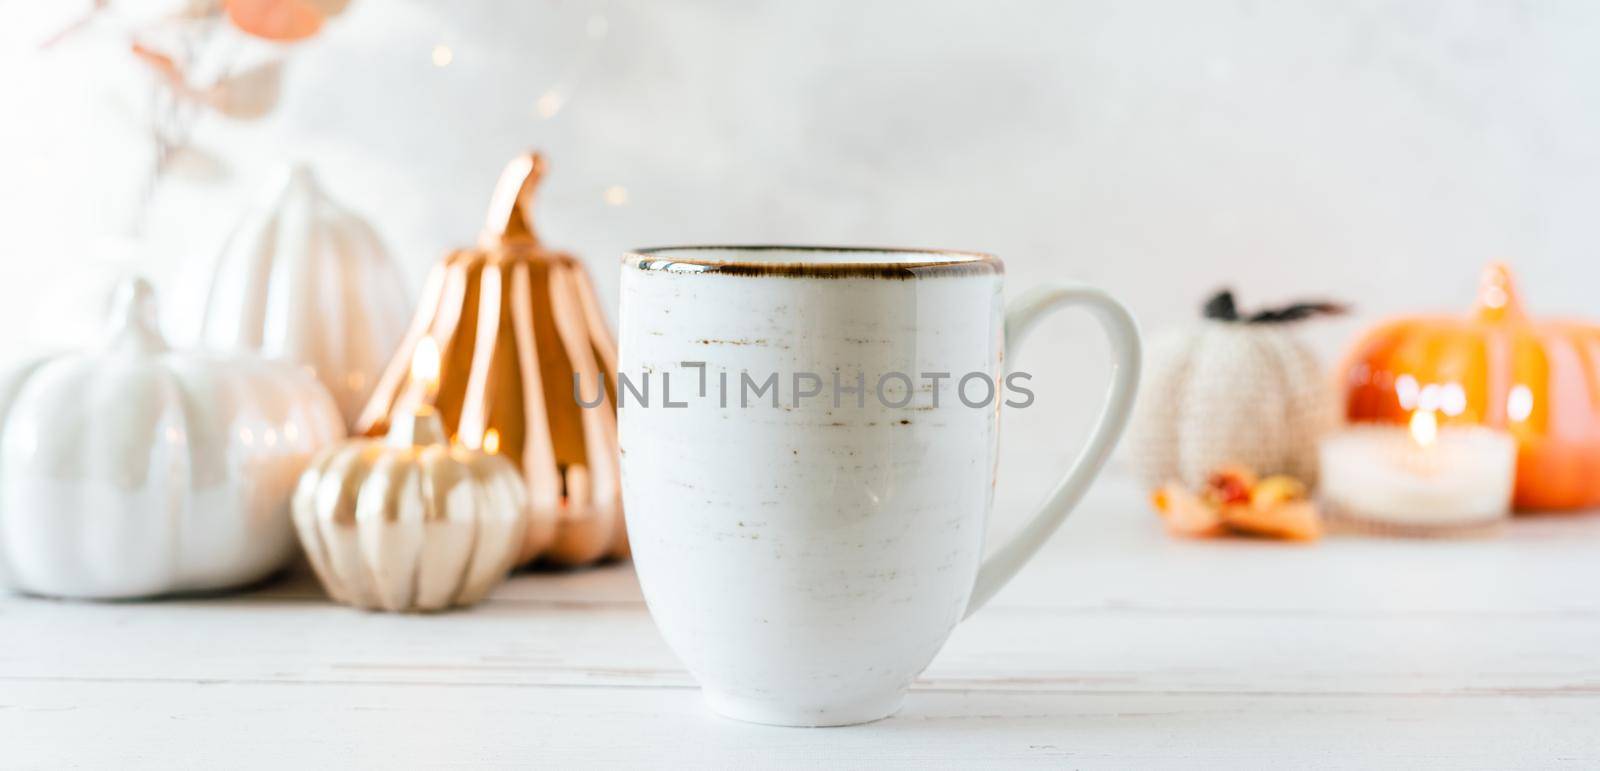 Details of Still life, cup of tea or coffee, pumpkins, candle, brunch with leaves on white table background, home decor in a cozy house. Autumn weekend concept. Fallen leaves and home decoration. by Ostanina